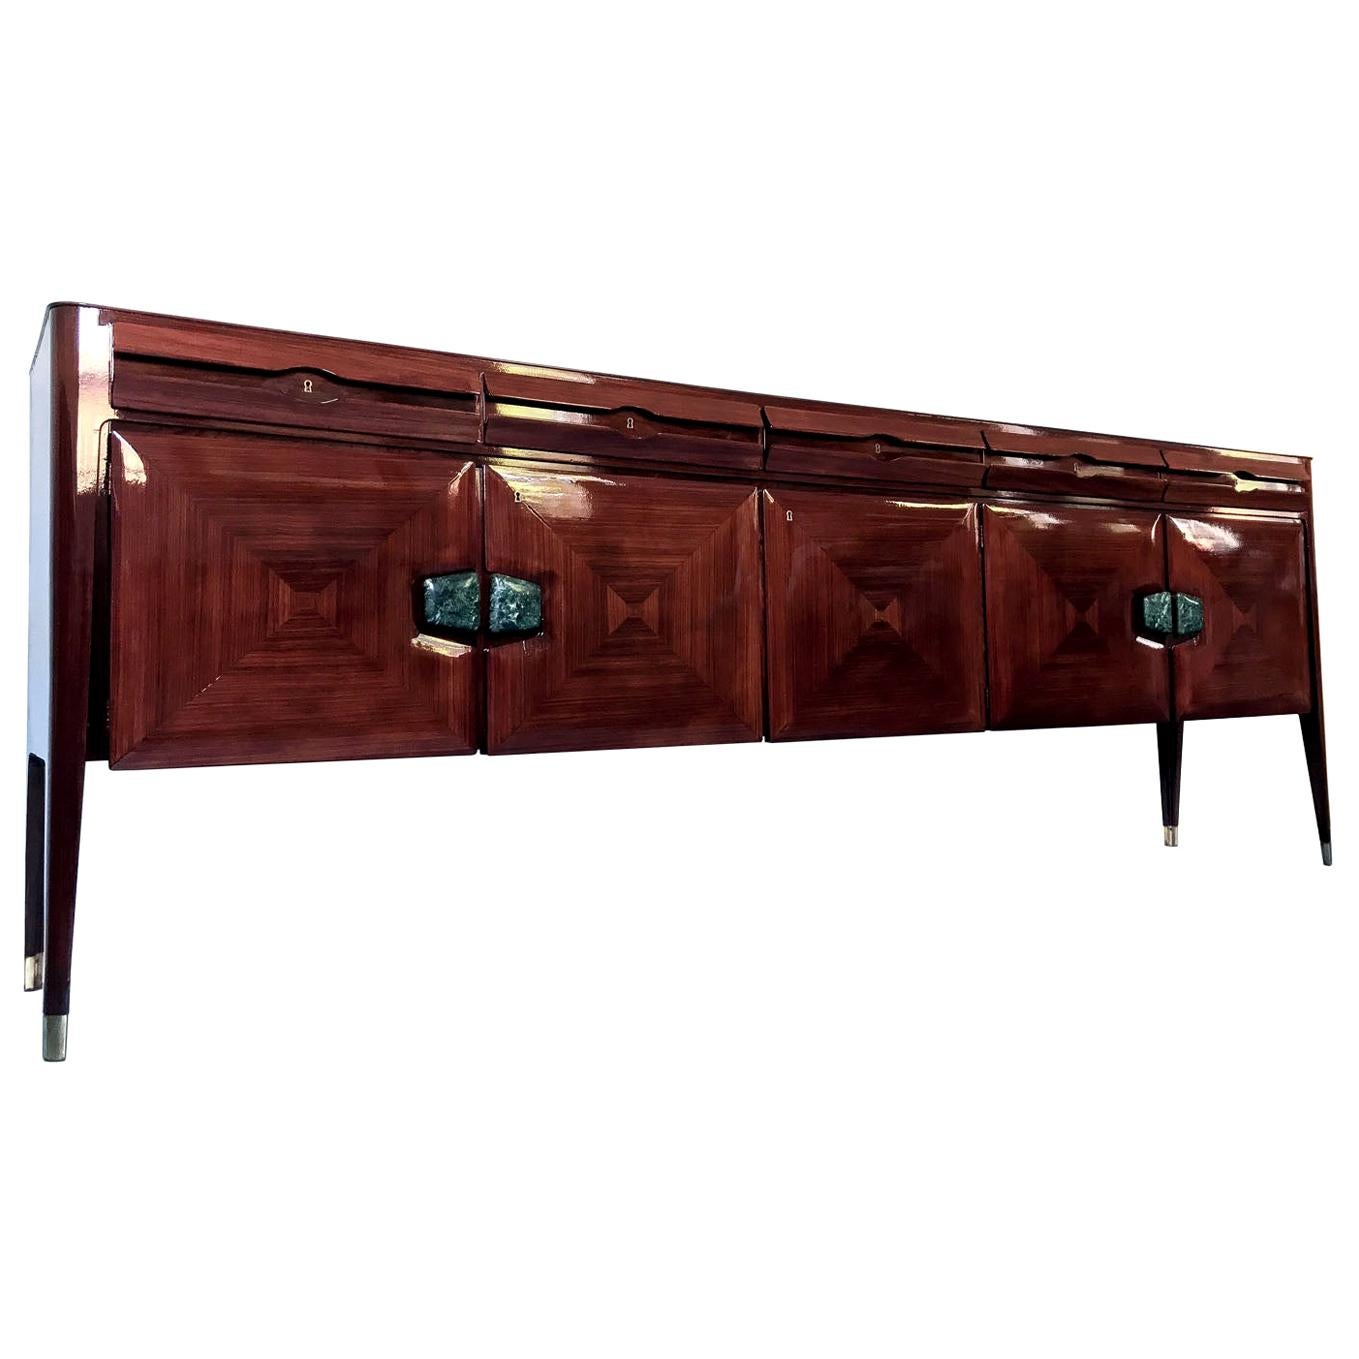 Stylish Italian Sideboard designed by Vittorio Dassi in the 1950s, finished with fine marble handles.
It's in very good conditions of the period, it has been fully restored recently and now ready to use.